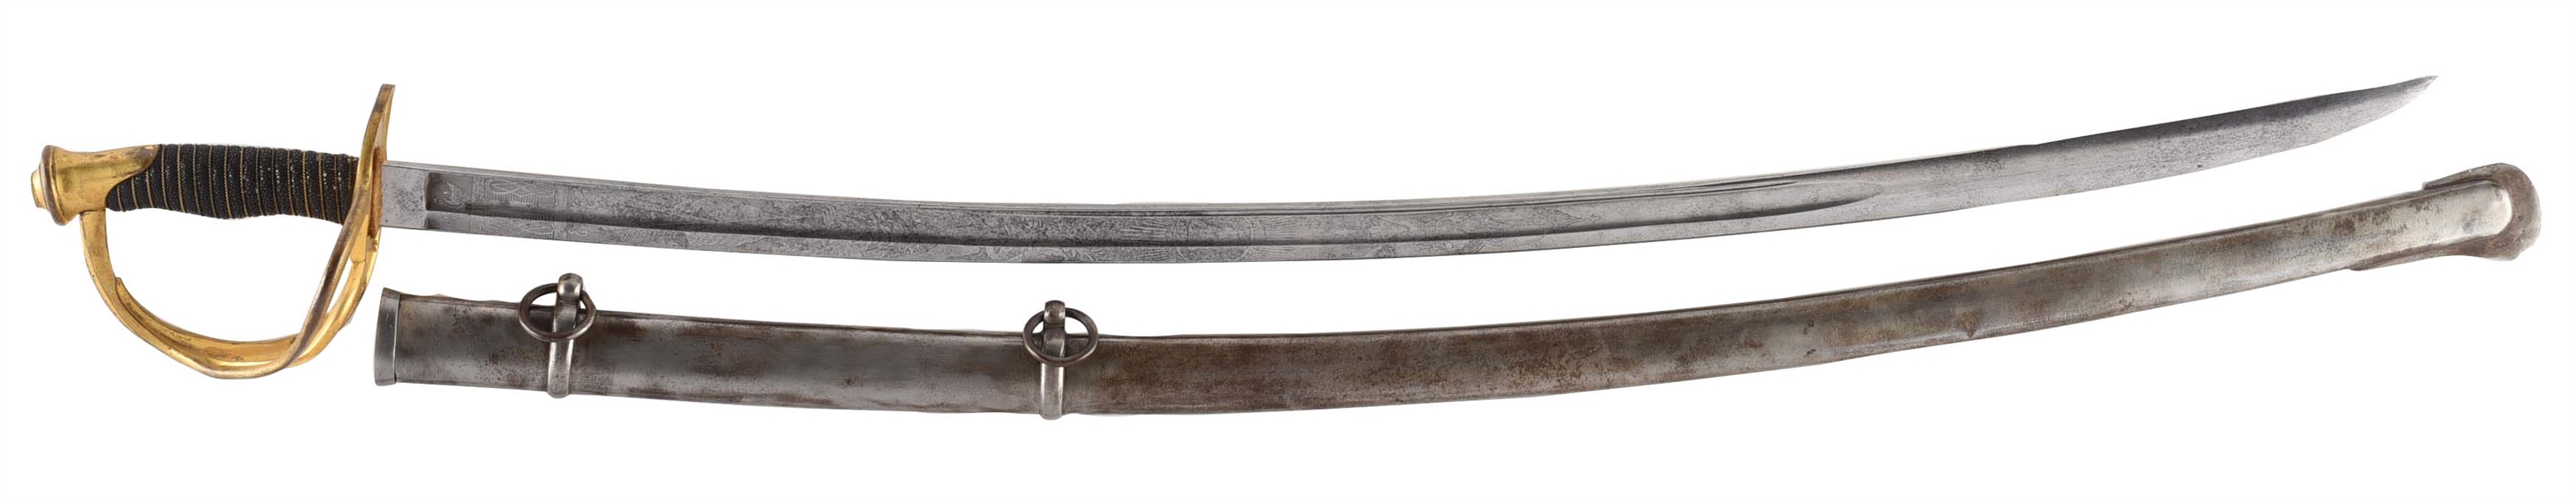 MODEL 1860 STYLE CAVALRY SABER BY SCHUYLER, HARTLEY & GRAHAM.